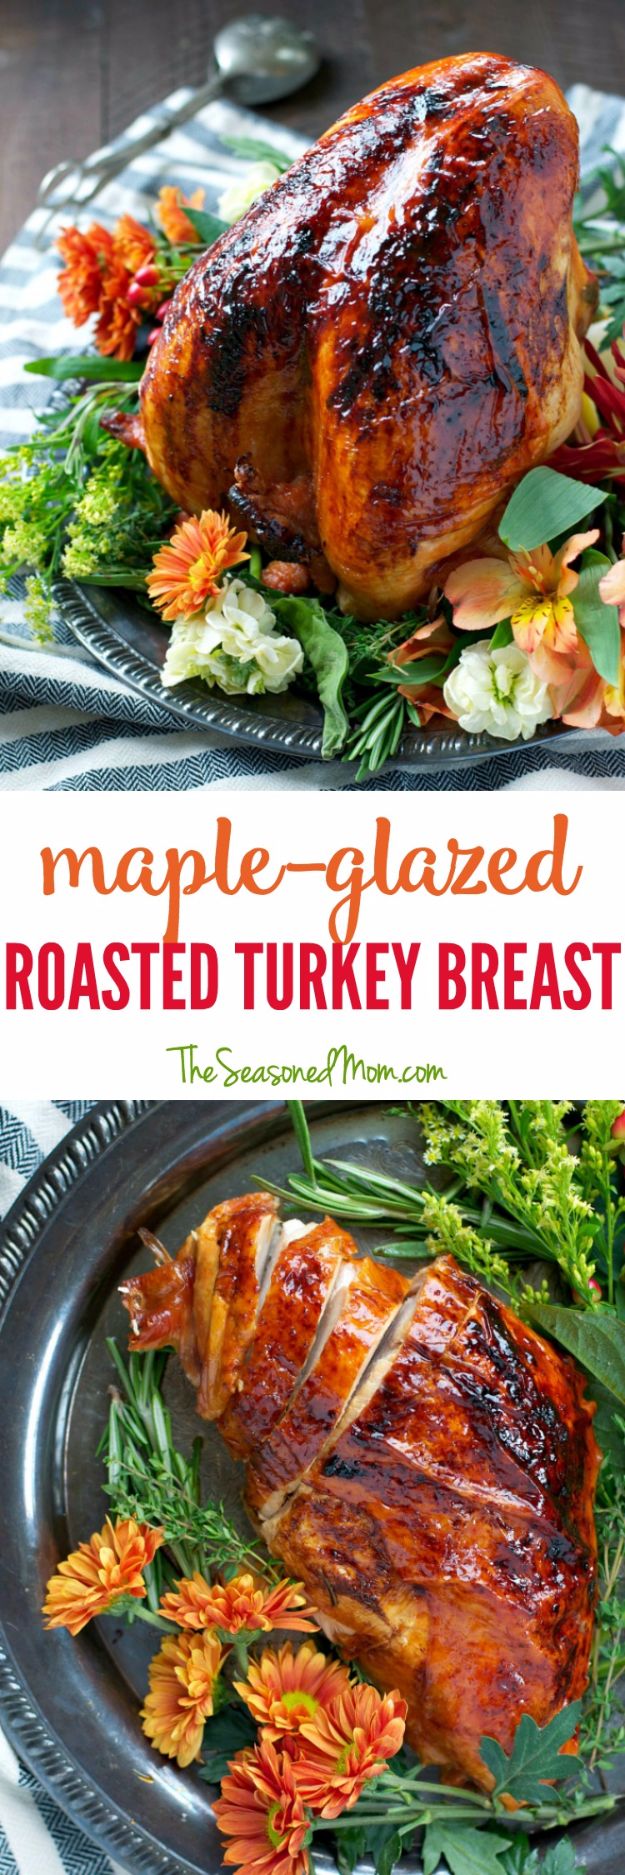 Best Fall Recipes and Ideas for Dinner - Easy Maple-Glazed Roasted Turkey Breast - Quick Meals With Chicken, Beef and Fish, Easy Crockpot Meals and Make Ahead Soups and Dinners - Healthy Dinner Recipes and Fast Last Minute Foods With Spinach, Vegetables, Butternut Squash, Pumpkin and Nuts 